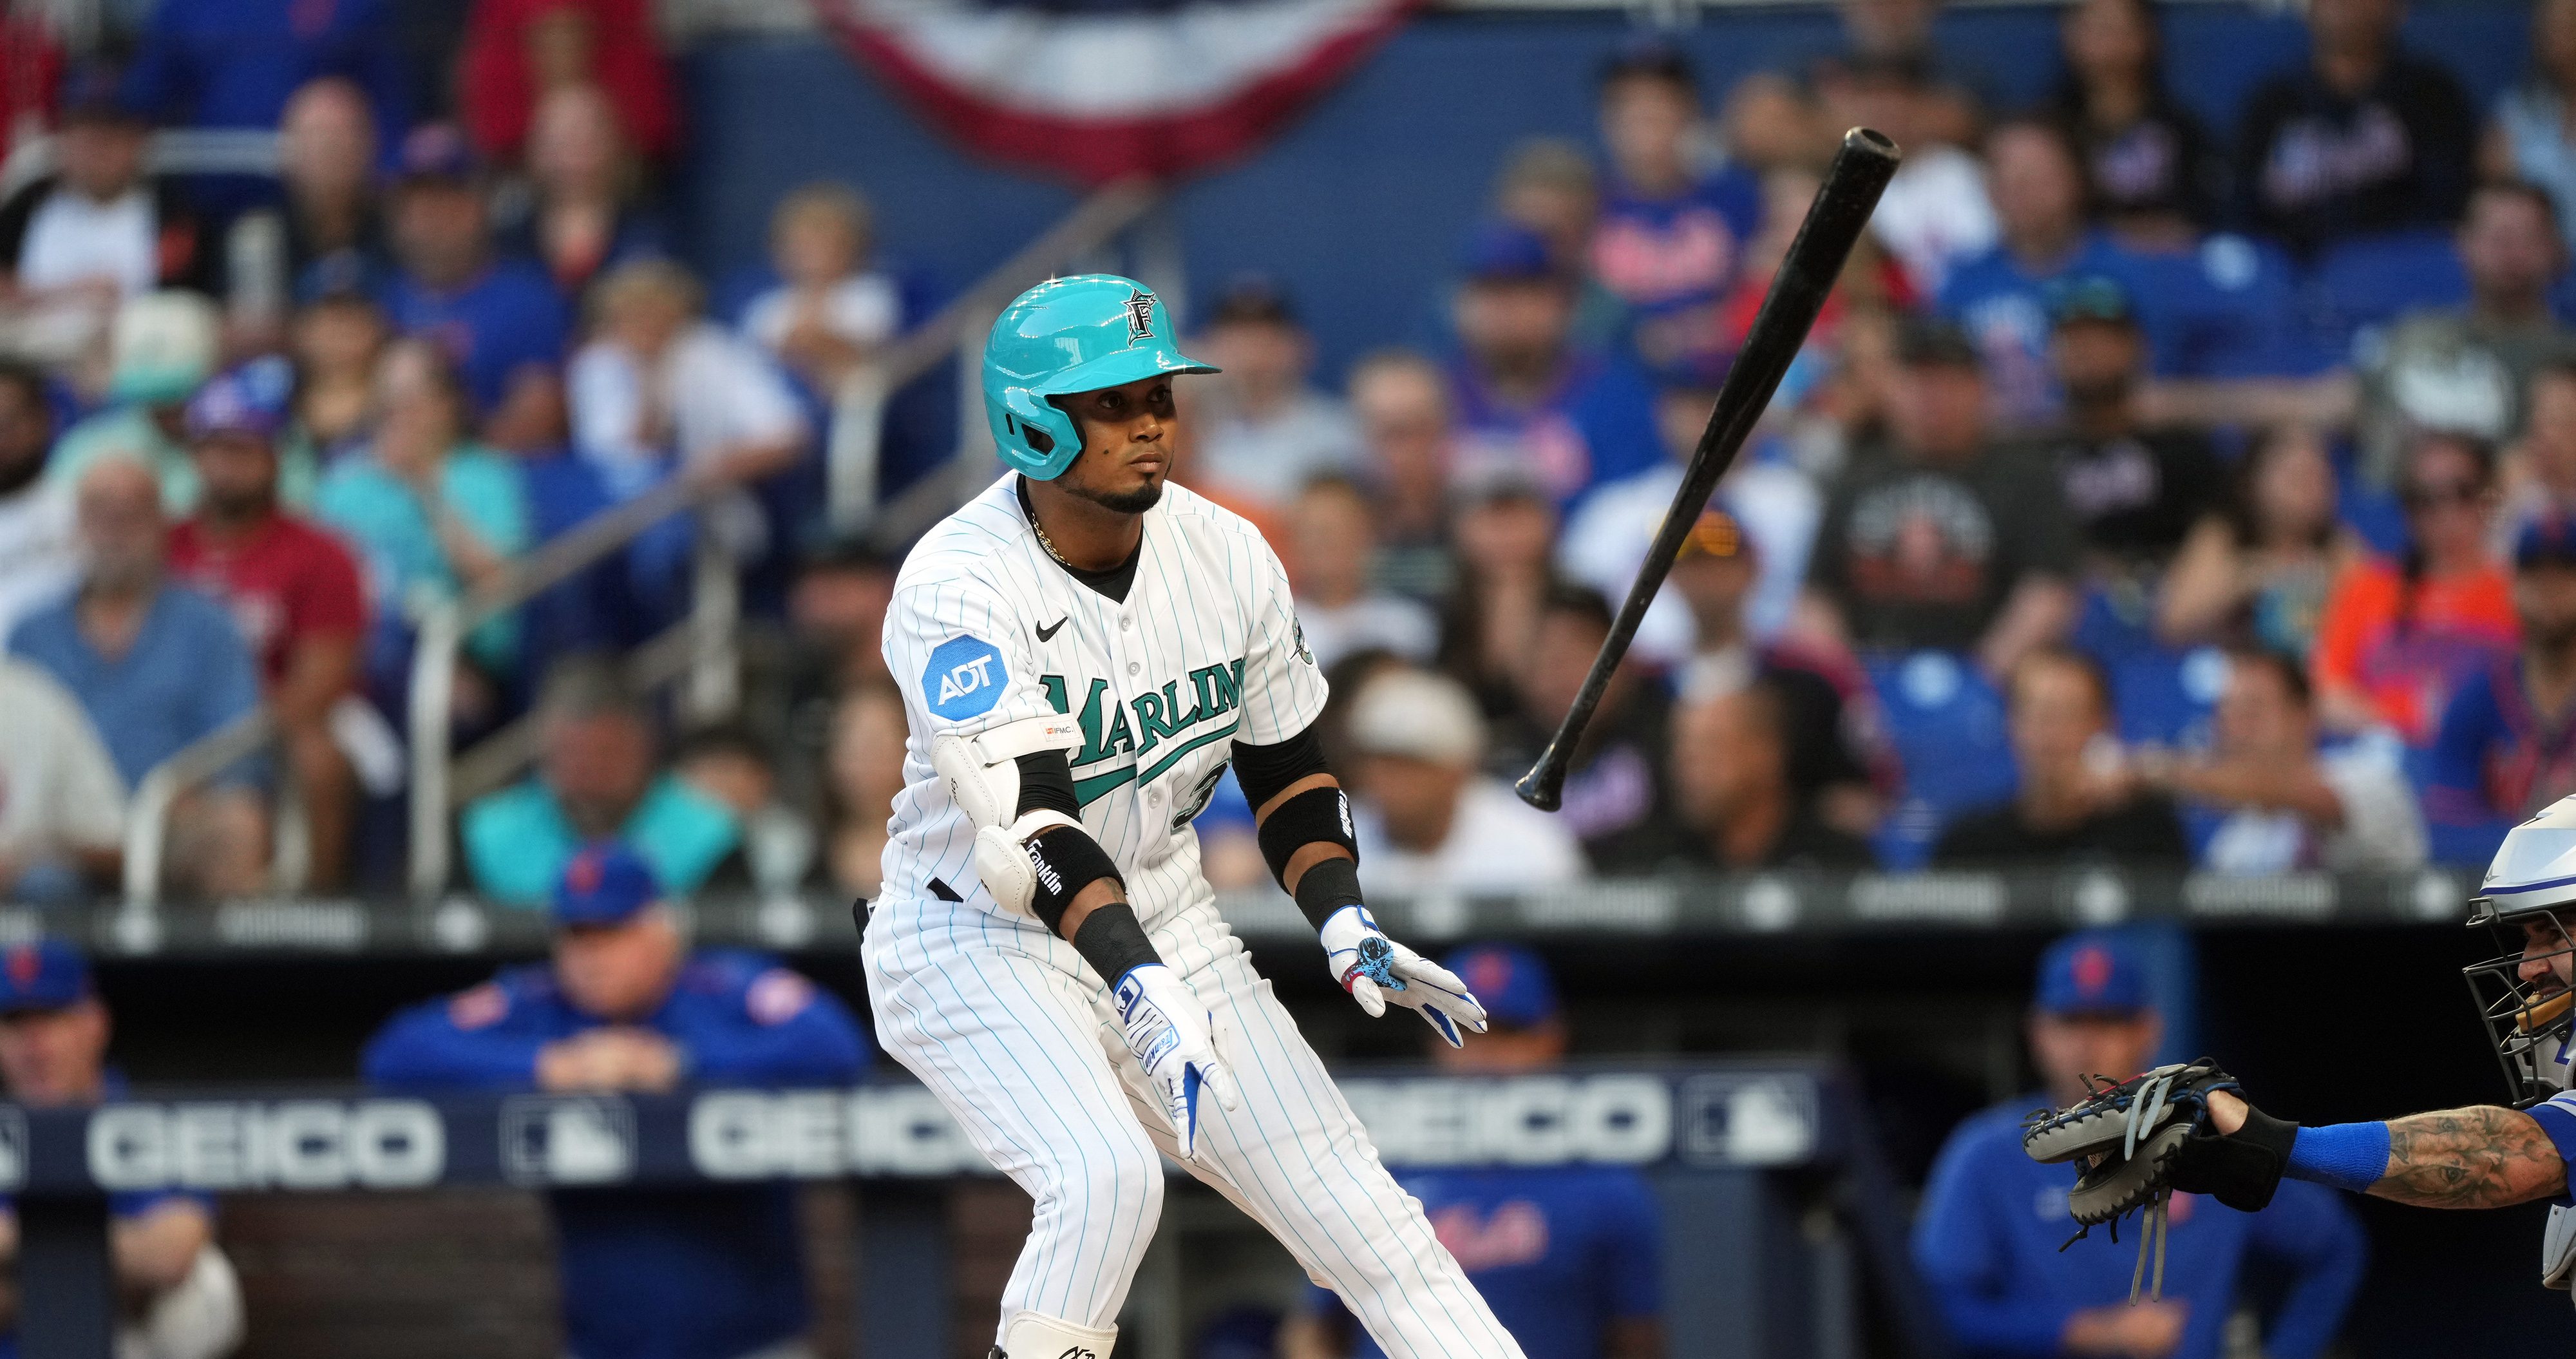 Marlins' teal uniforms back for 30th anniversary